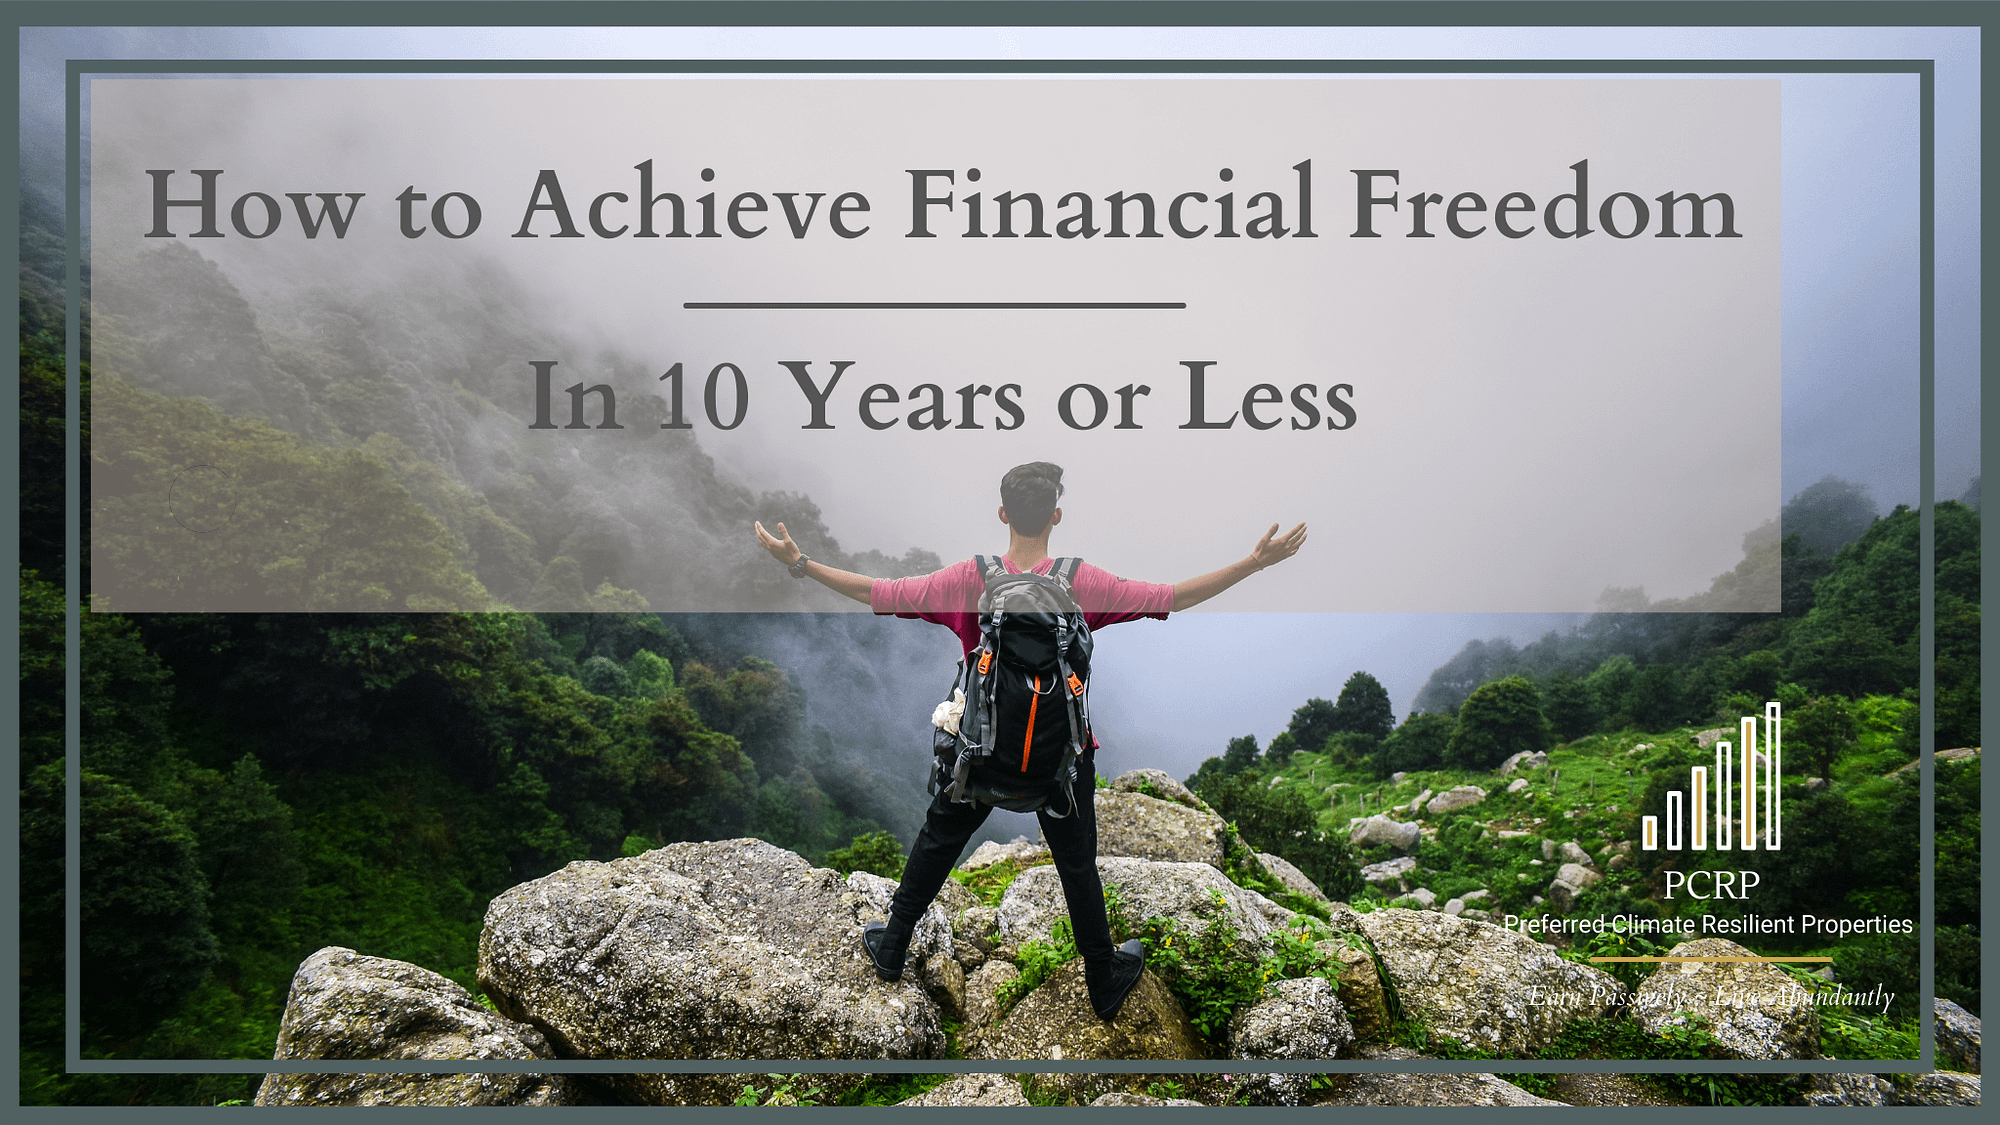 How to achieve financial freedom in 10 years or less